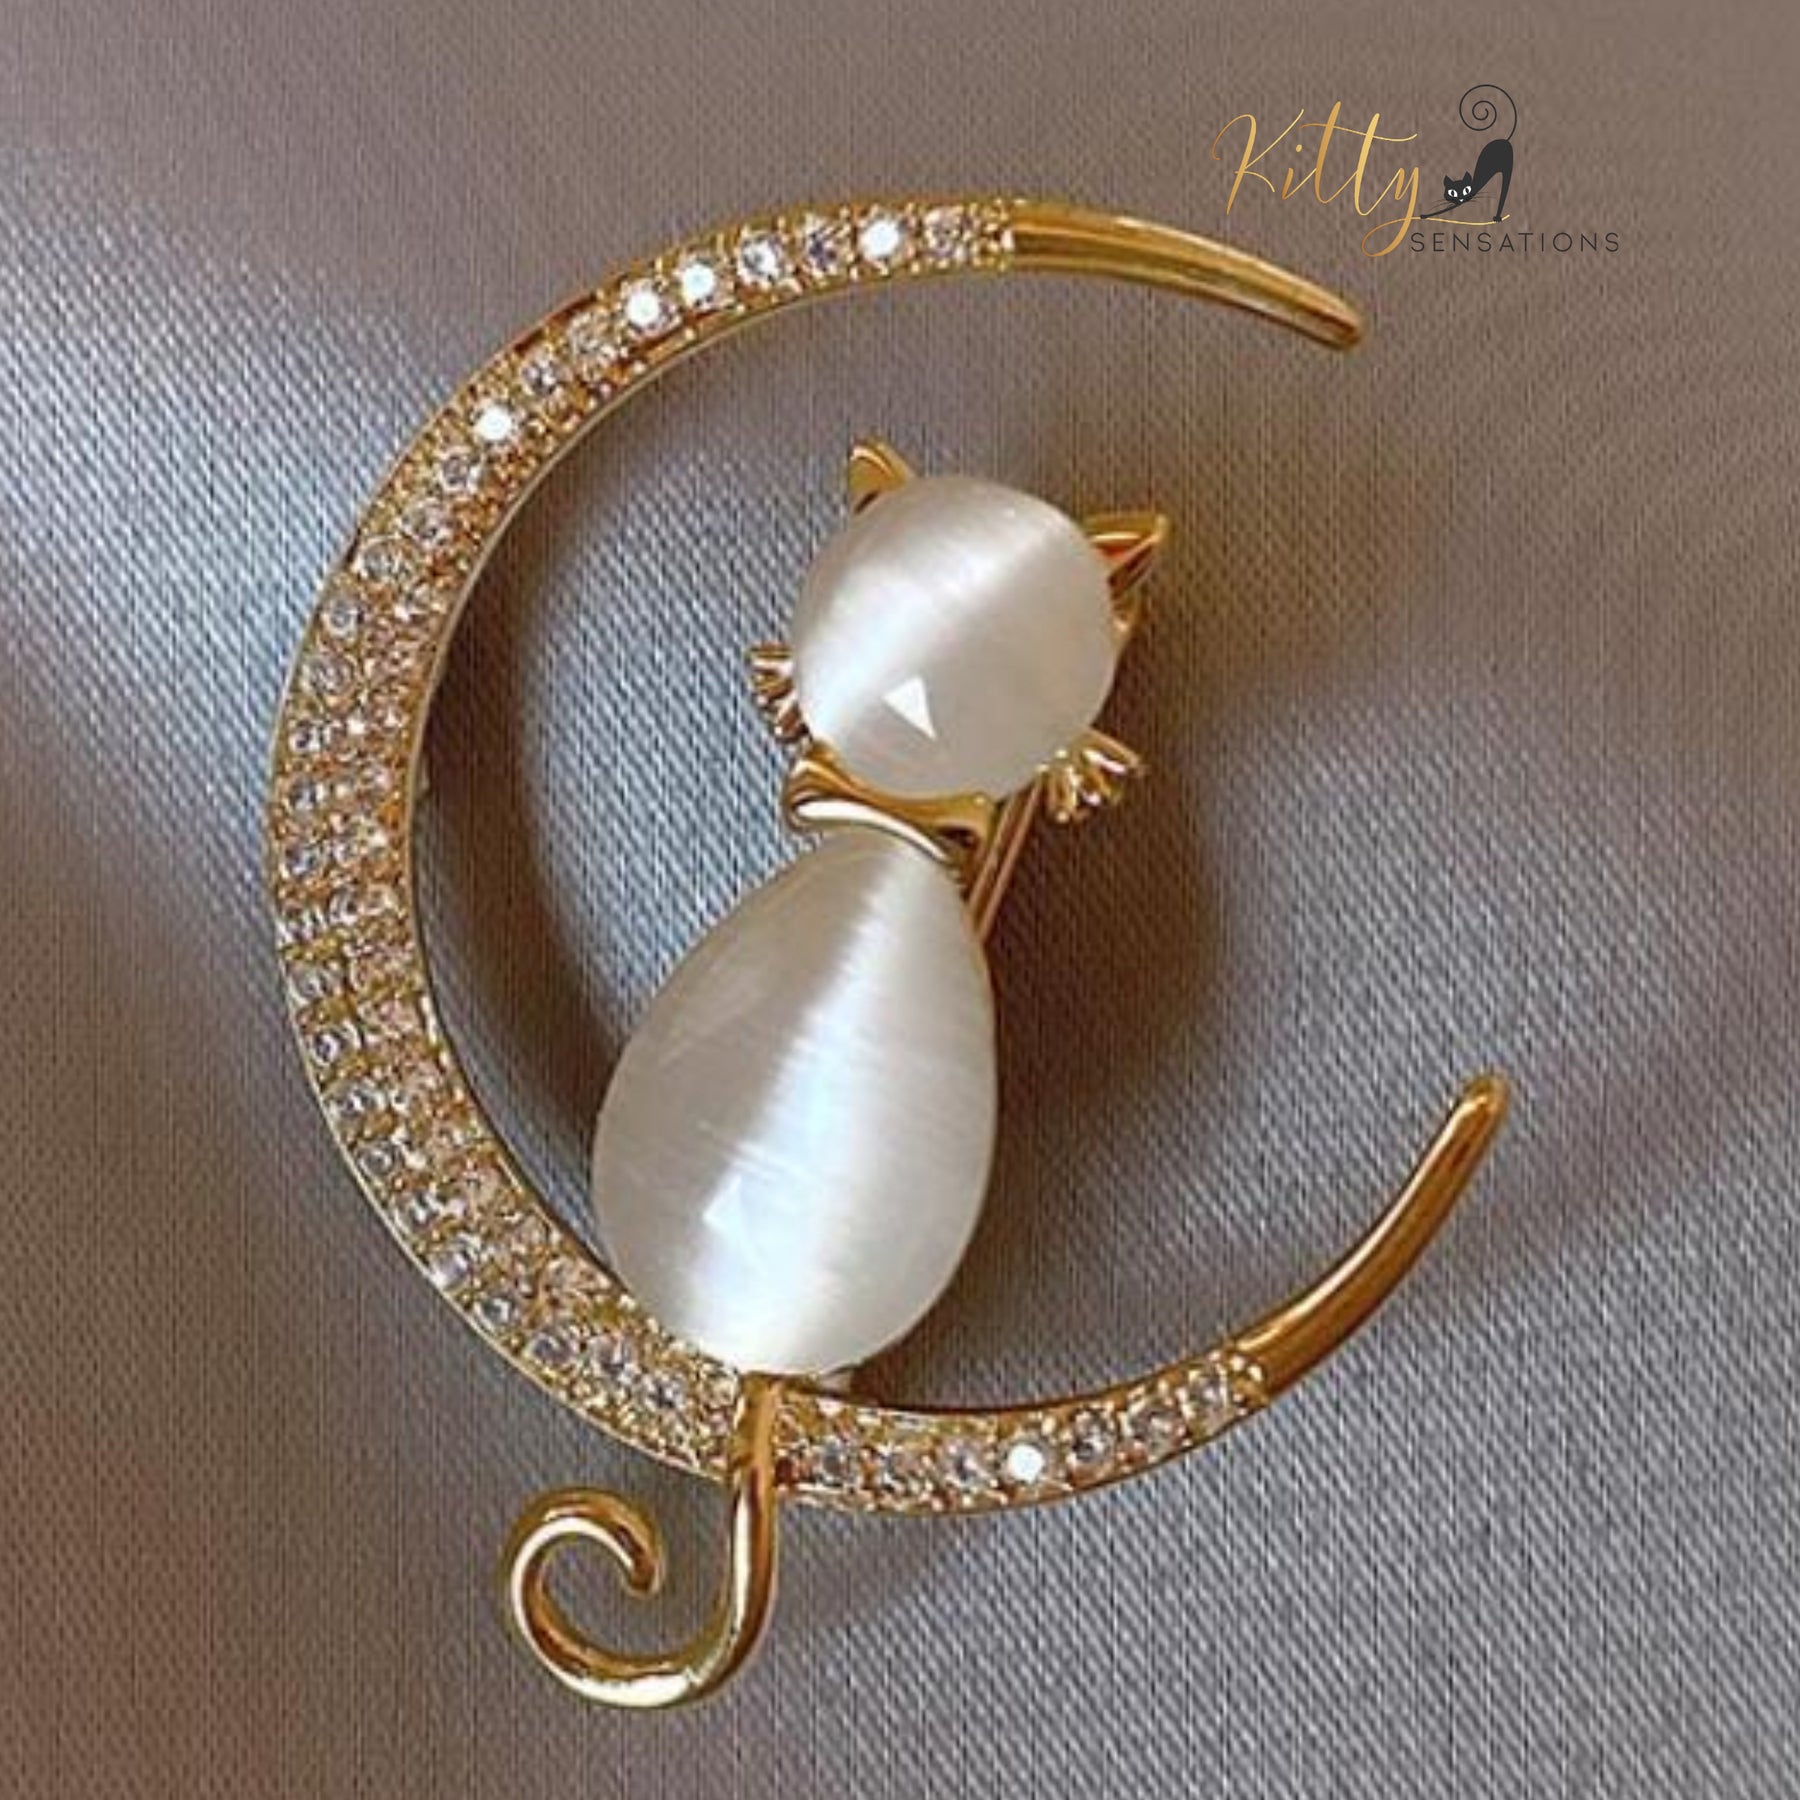 Moon Kitty Brooch in Natural Opal and Cubic Zirconia